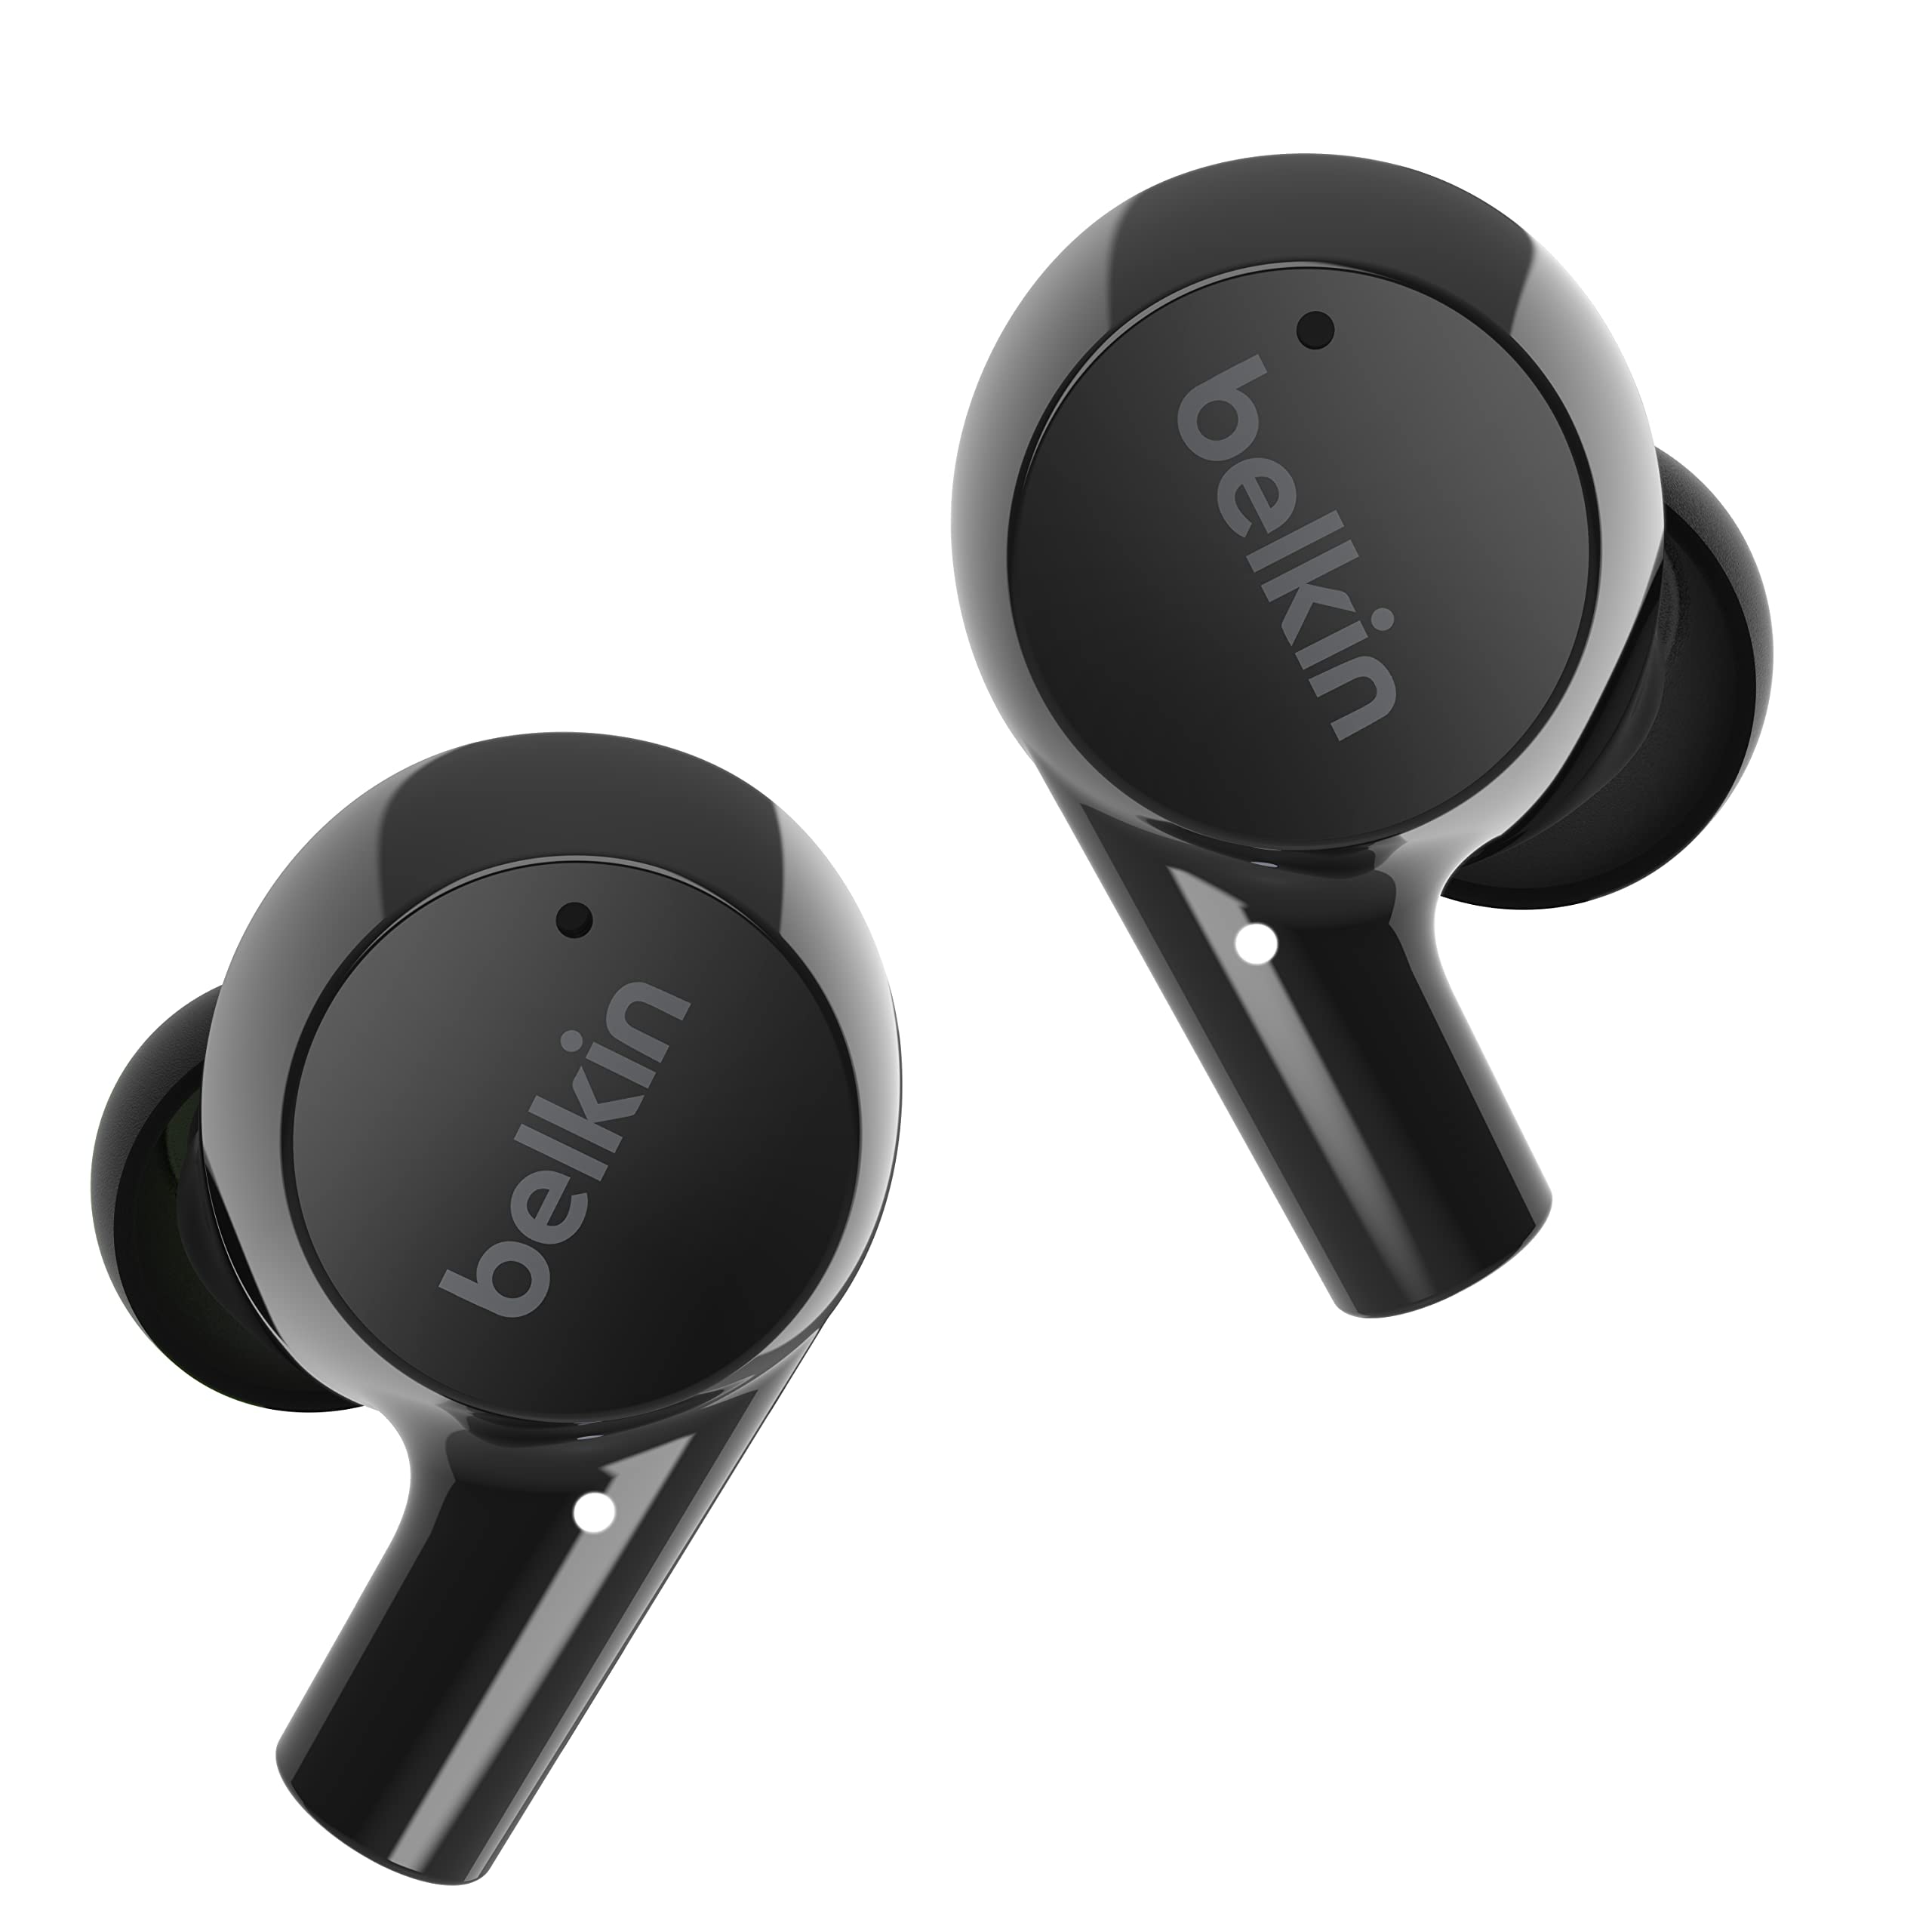 Belkin SoundForm Rise True Wireless Ear Buds with Wireless Charger Case, Dual Microphone, IPX5 Water Resistant Earbuds, Bluetooth Headphones, Compatible with iPhone, Galaxy, and More - Black